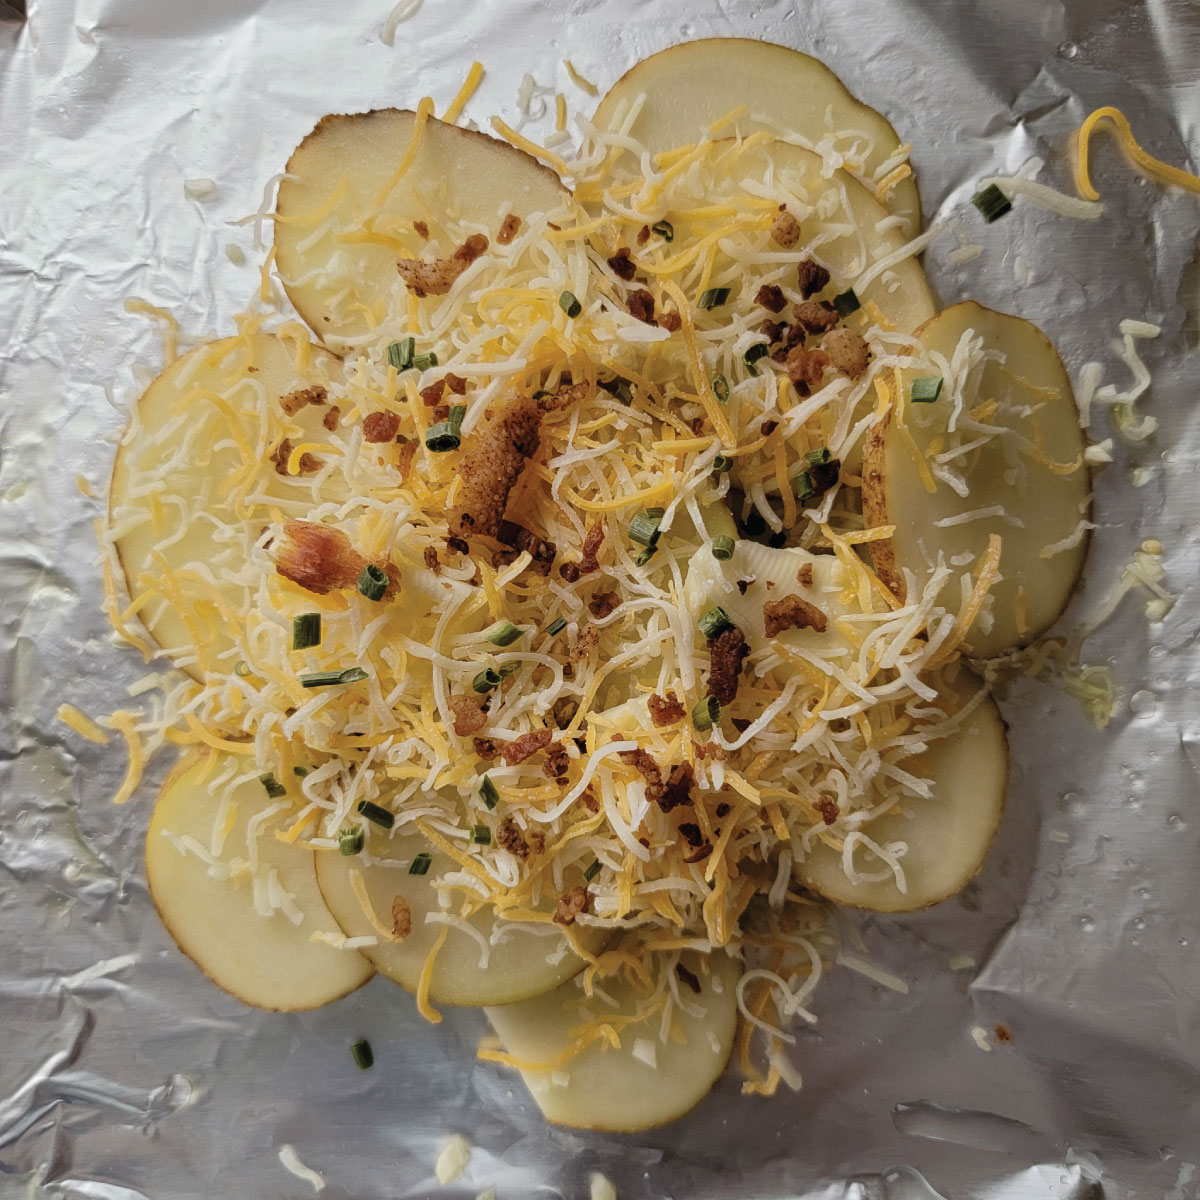 Potato slices on the foil topped with cheese, garlic, chives and bacon.